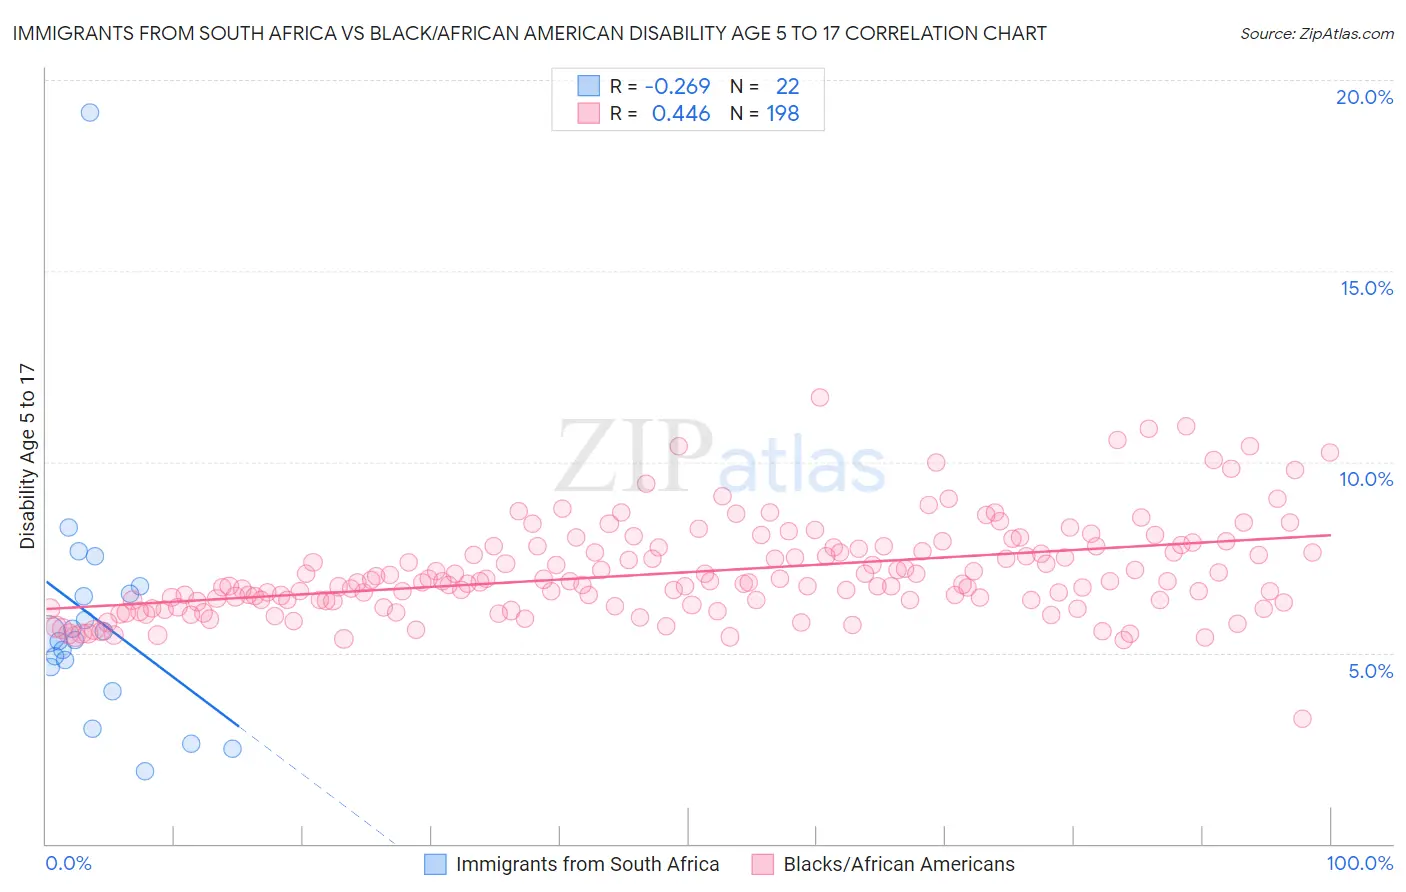 Immigrants from South Africa vs Black/African American Disability Age 5 to 17